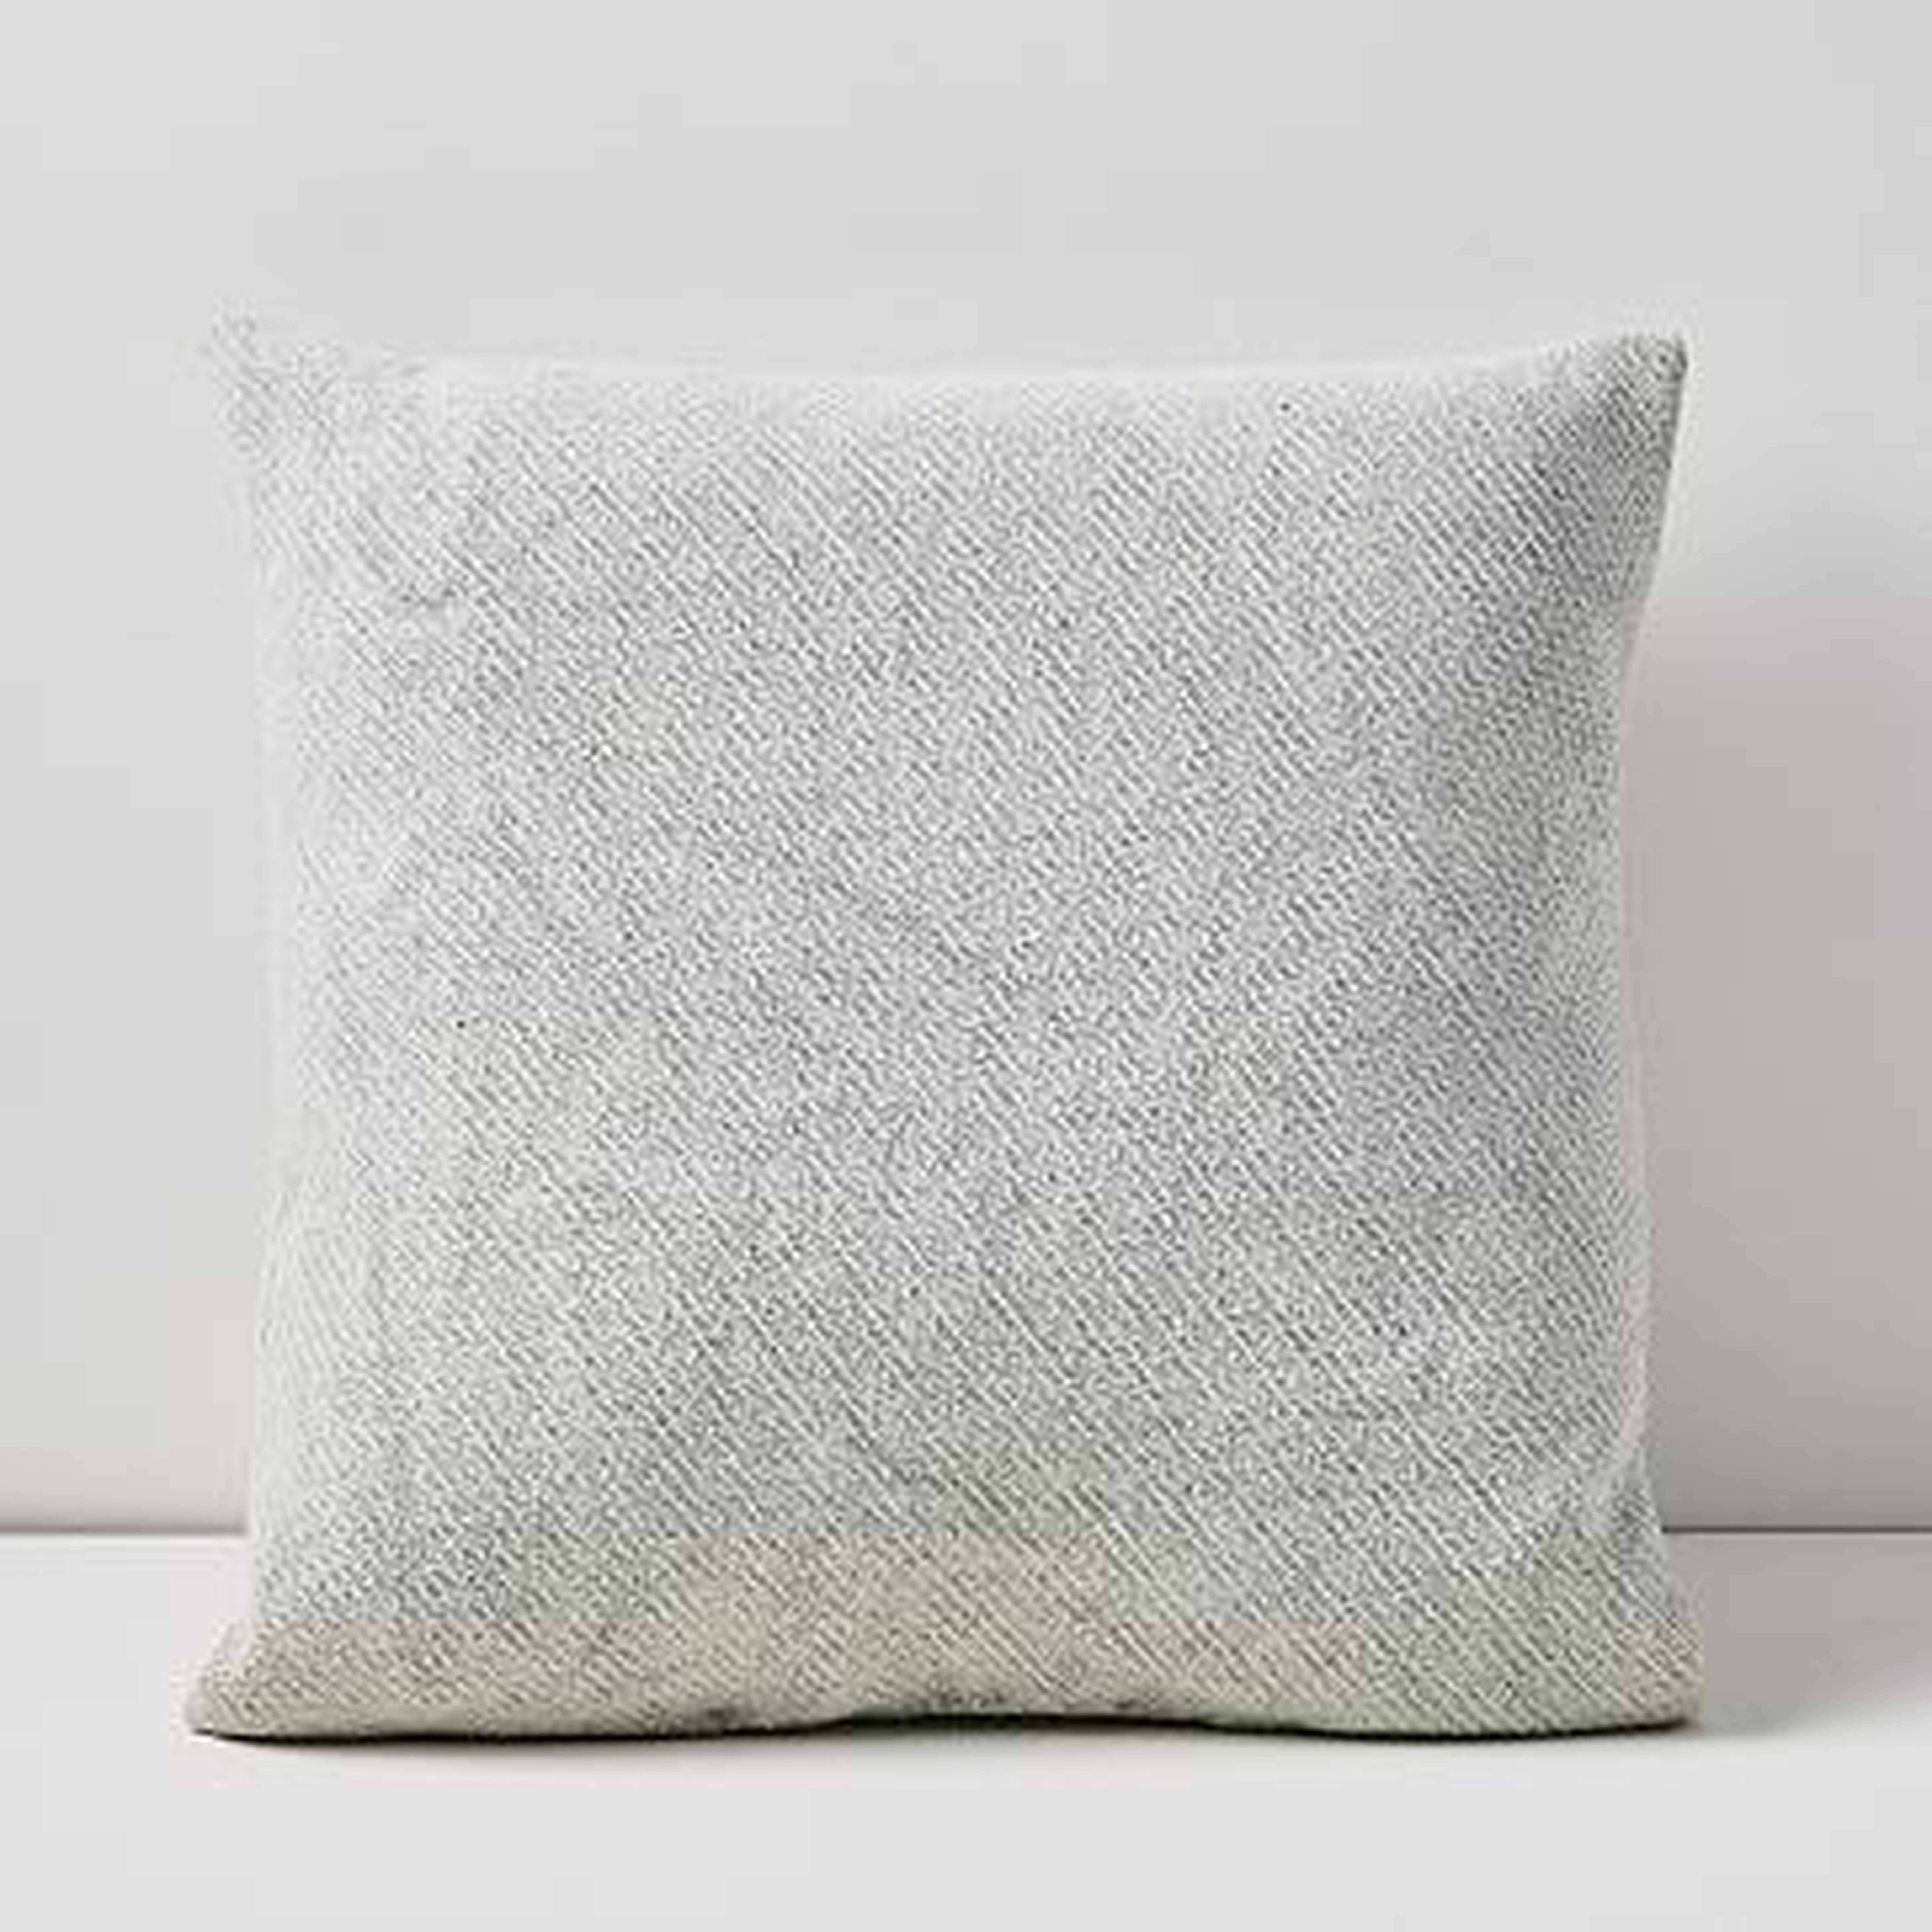 Outdoor Garment Washed Pillow, 20"x20", Frost Gray - West Elm